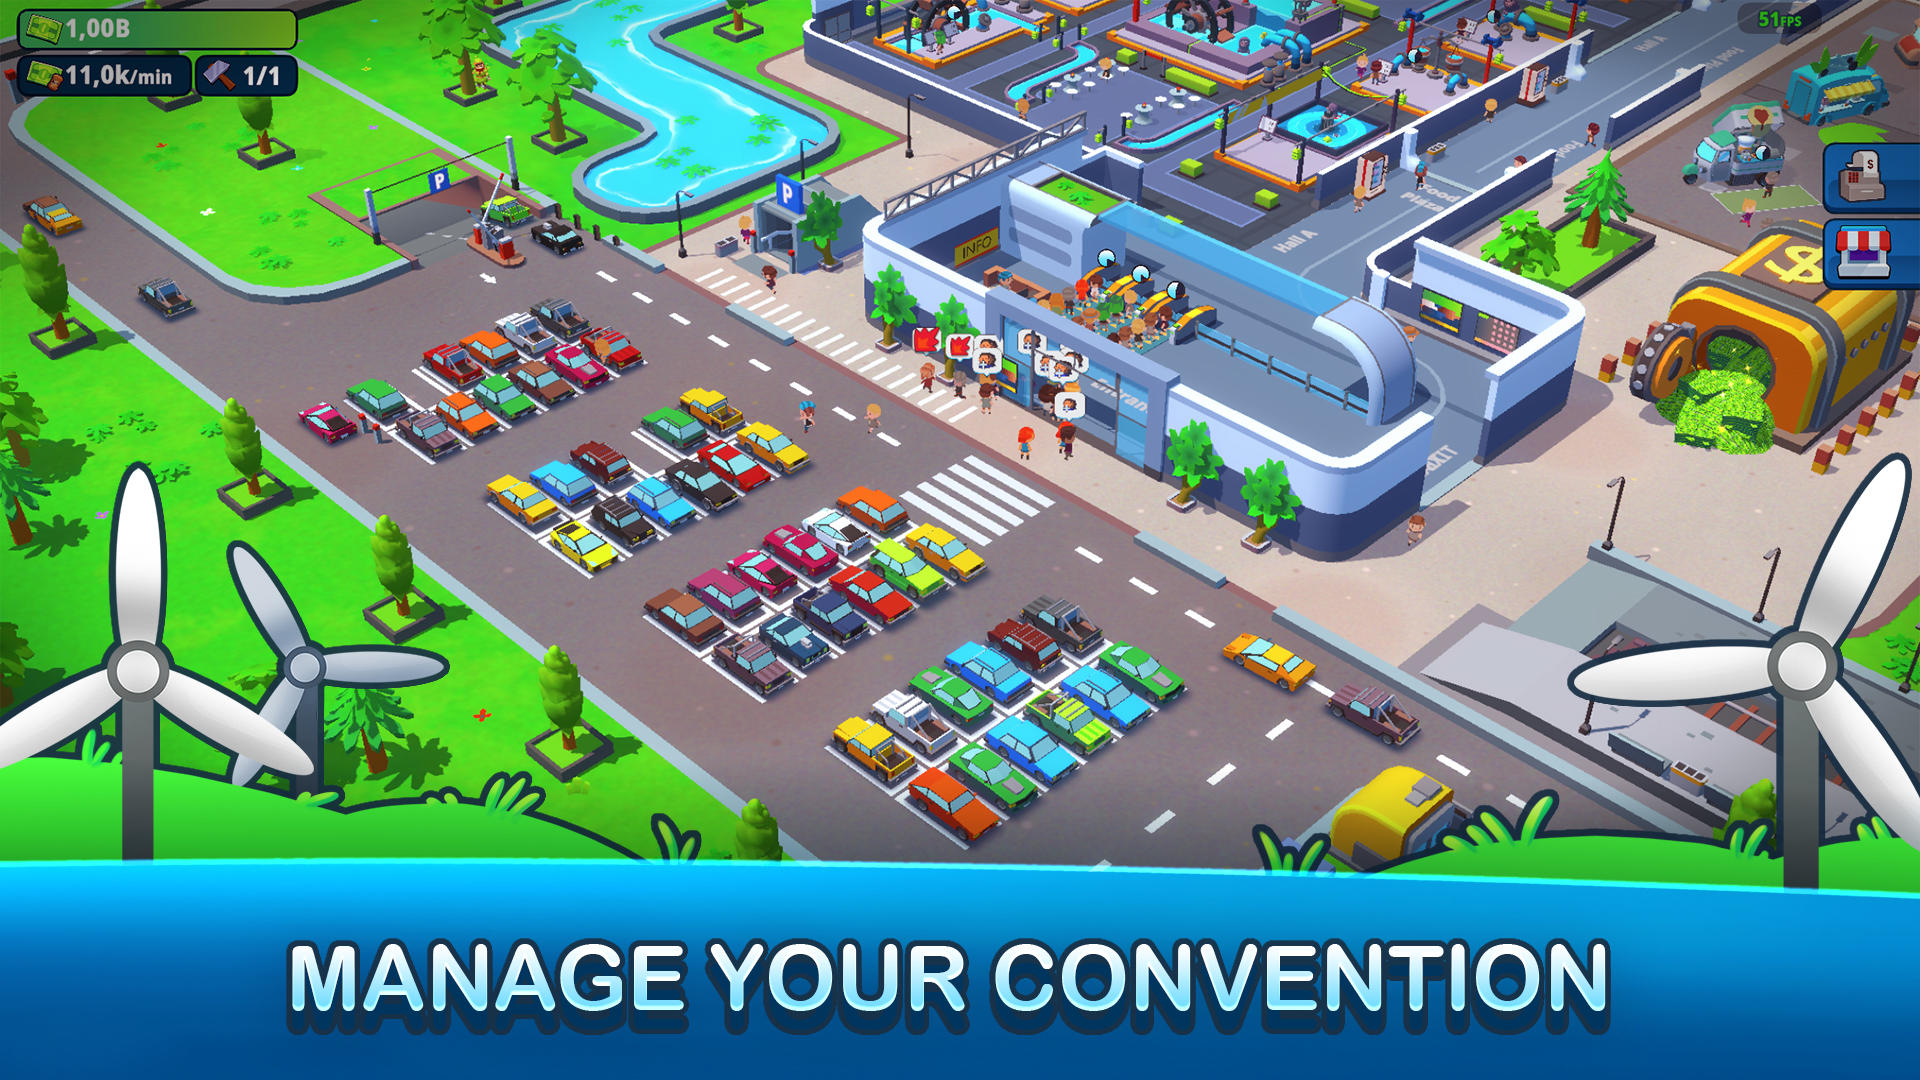 Screenshot 1 of Idle Convention Manager 0.6.3